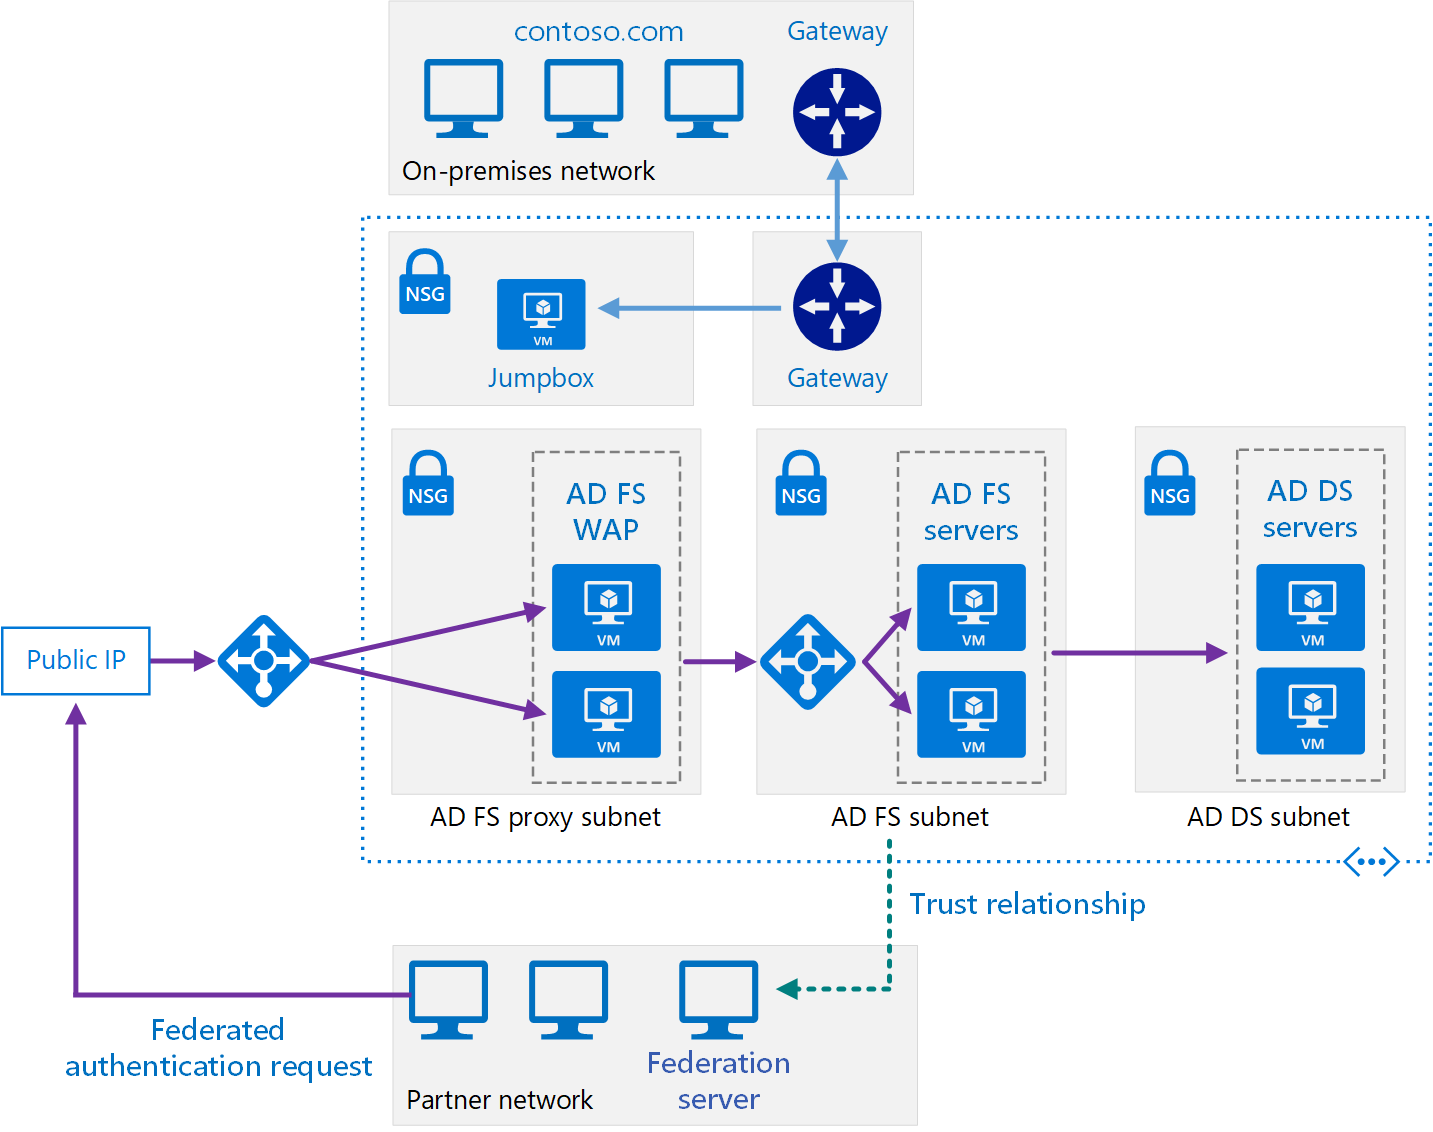 Secure hybrid network architecture with Active Directory